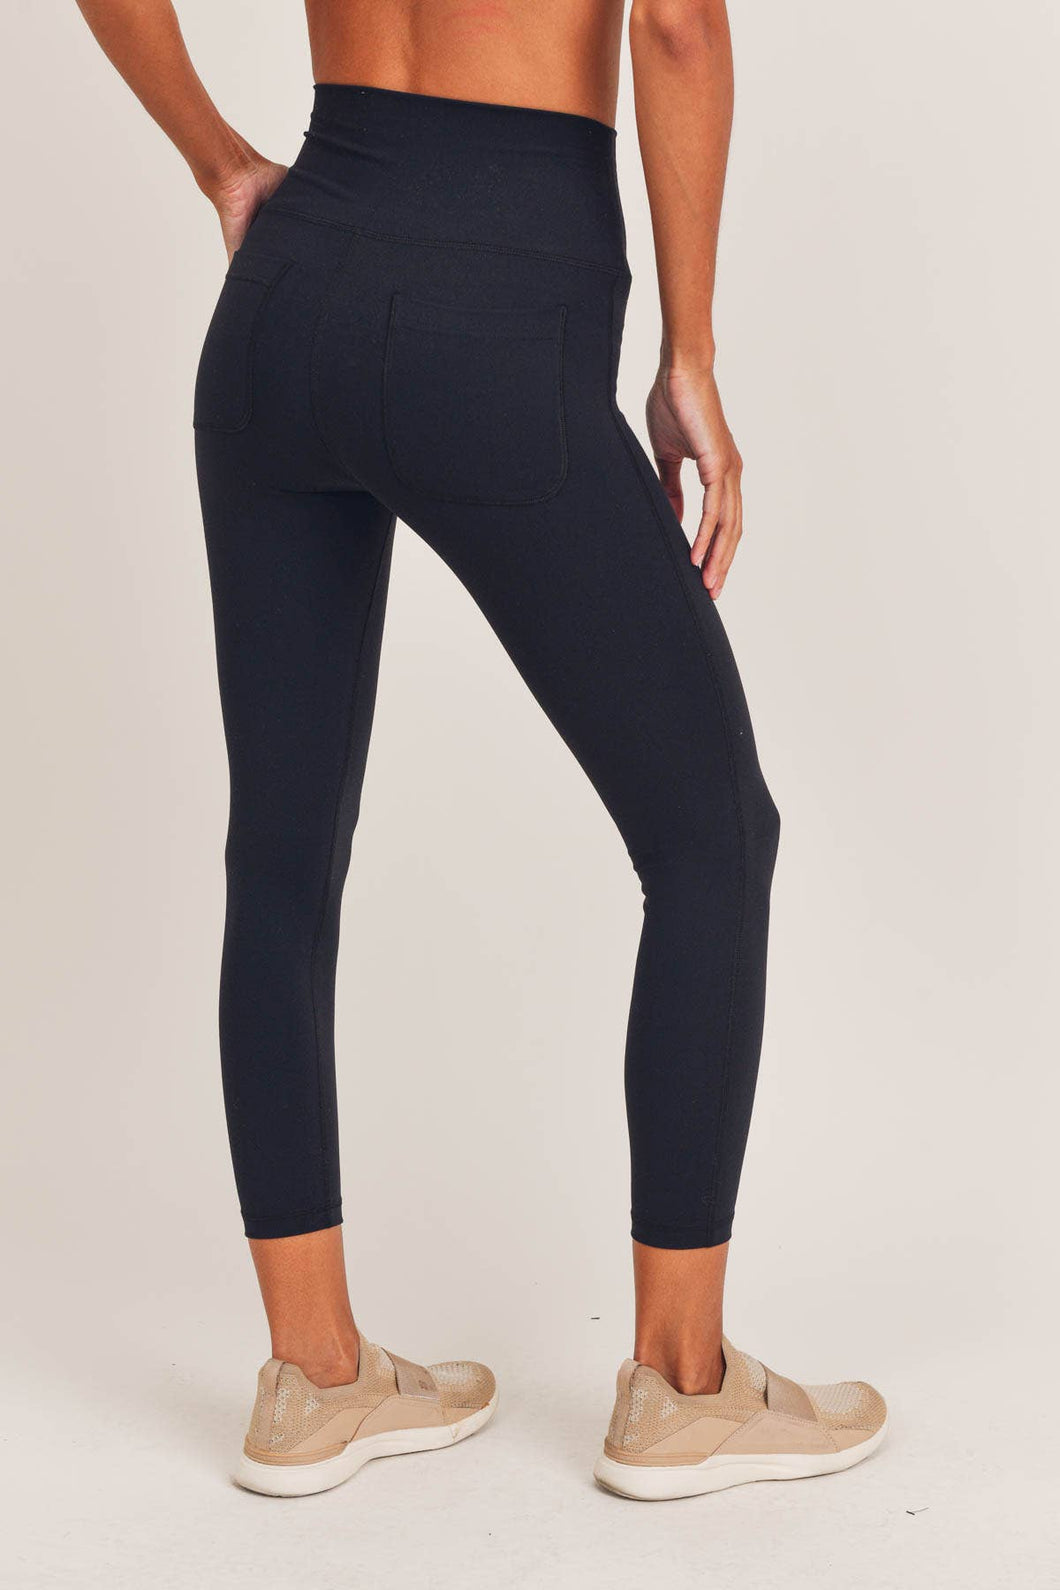 Tapered Black Leggings with Back Pockets